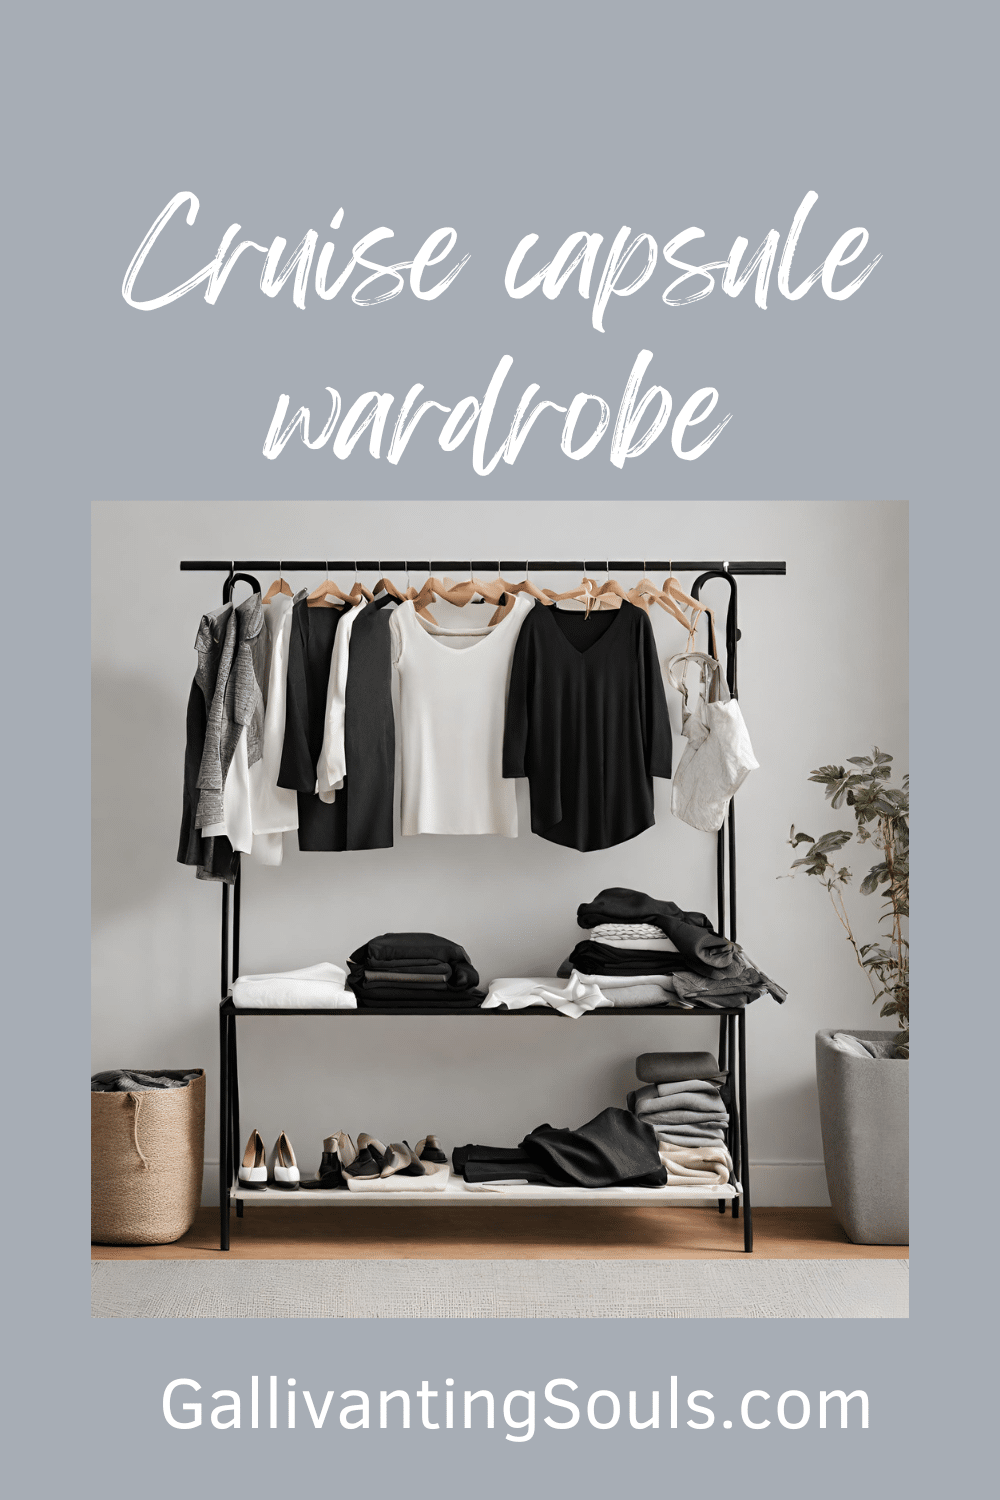 A sample capsule wardrobe for your next crusie